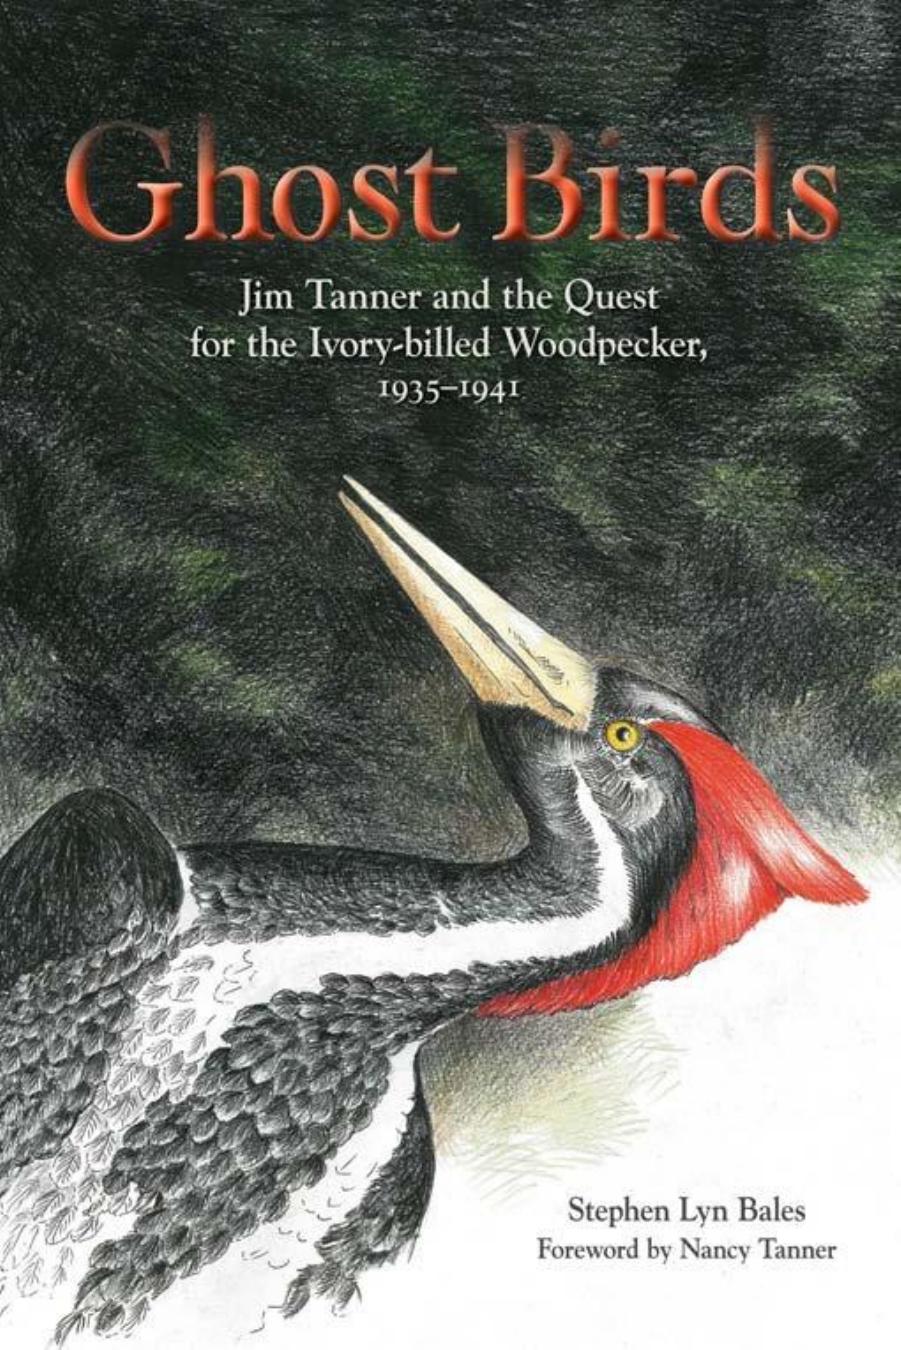 Ghost Birds : Jim Tanner and the Quest for the Ivory-Billed Woodpecker, 1935-1941 by Stephen Lyn Bales; Nancy Tanner